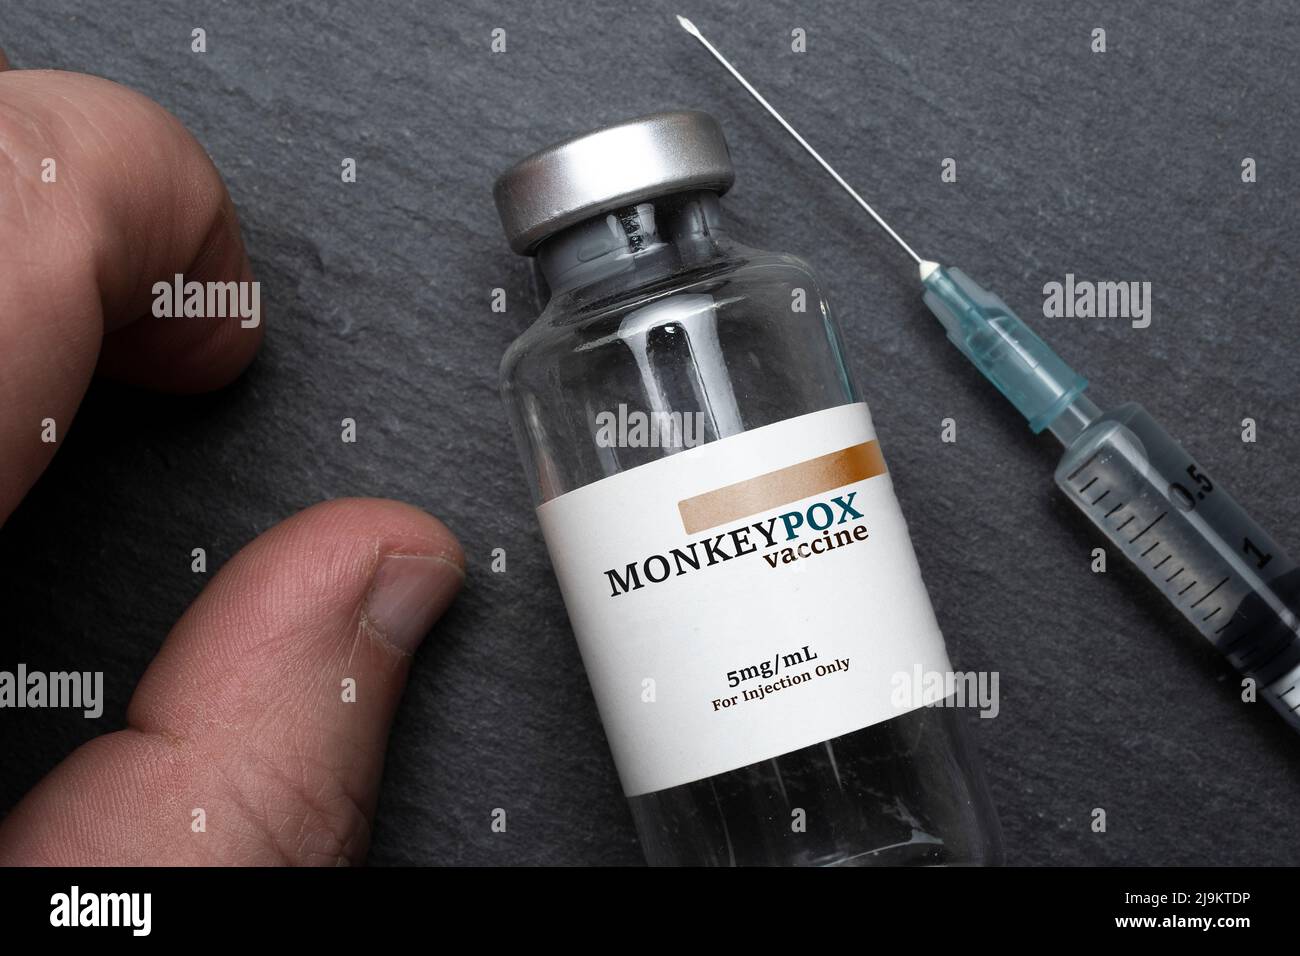 Vial of monkeypox vaccine ready to be injected Stock Photo